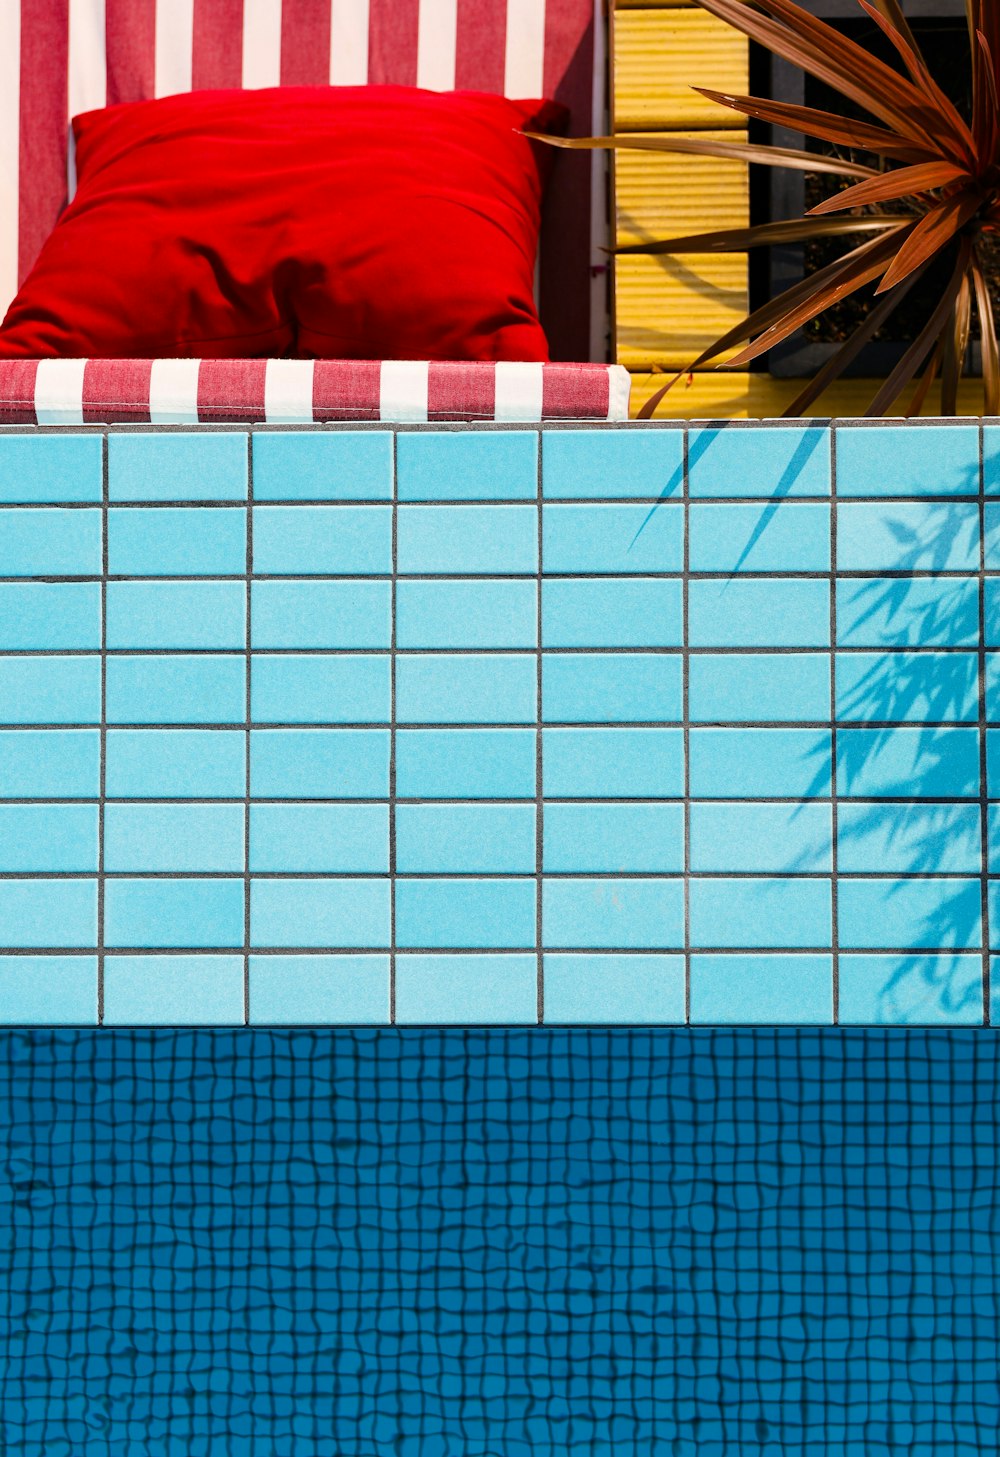 a red pillow sitting on top of a blue swimming pool